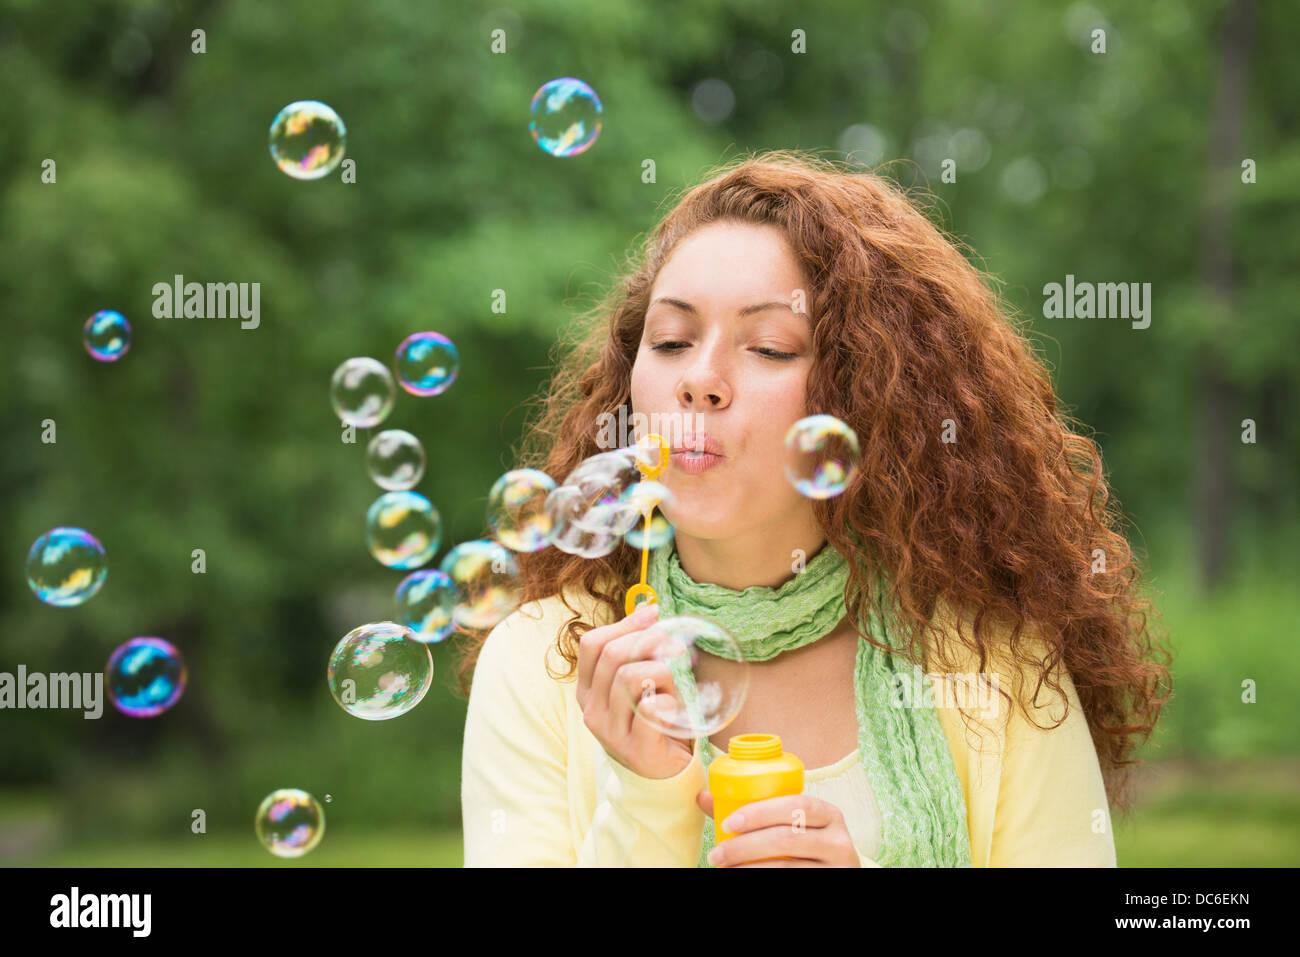 Young woman blowing bubbles in park Banque D'Images